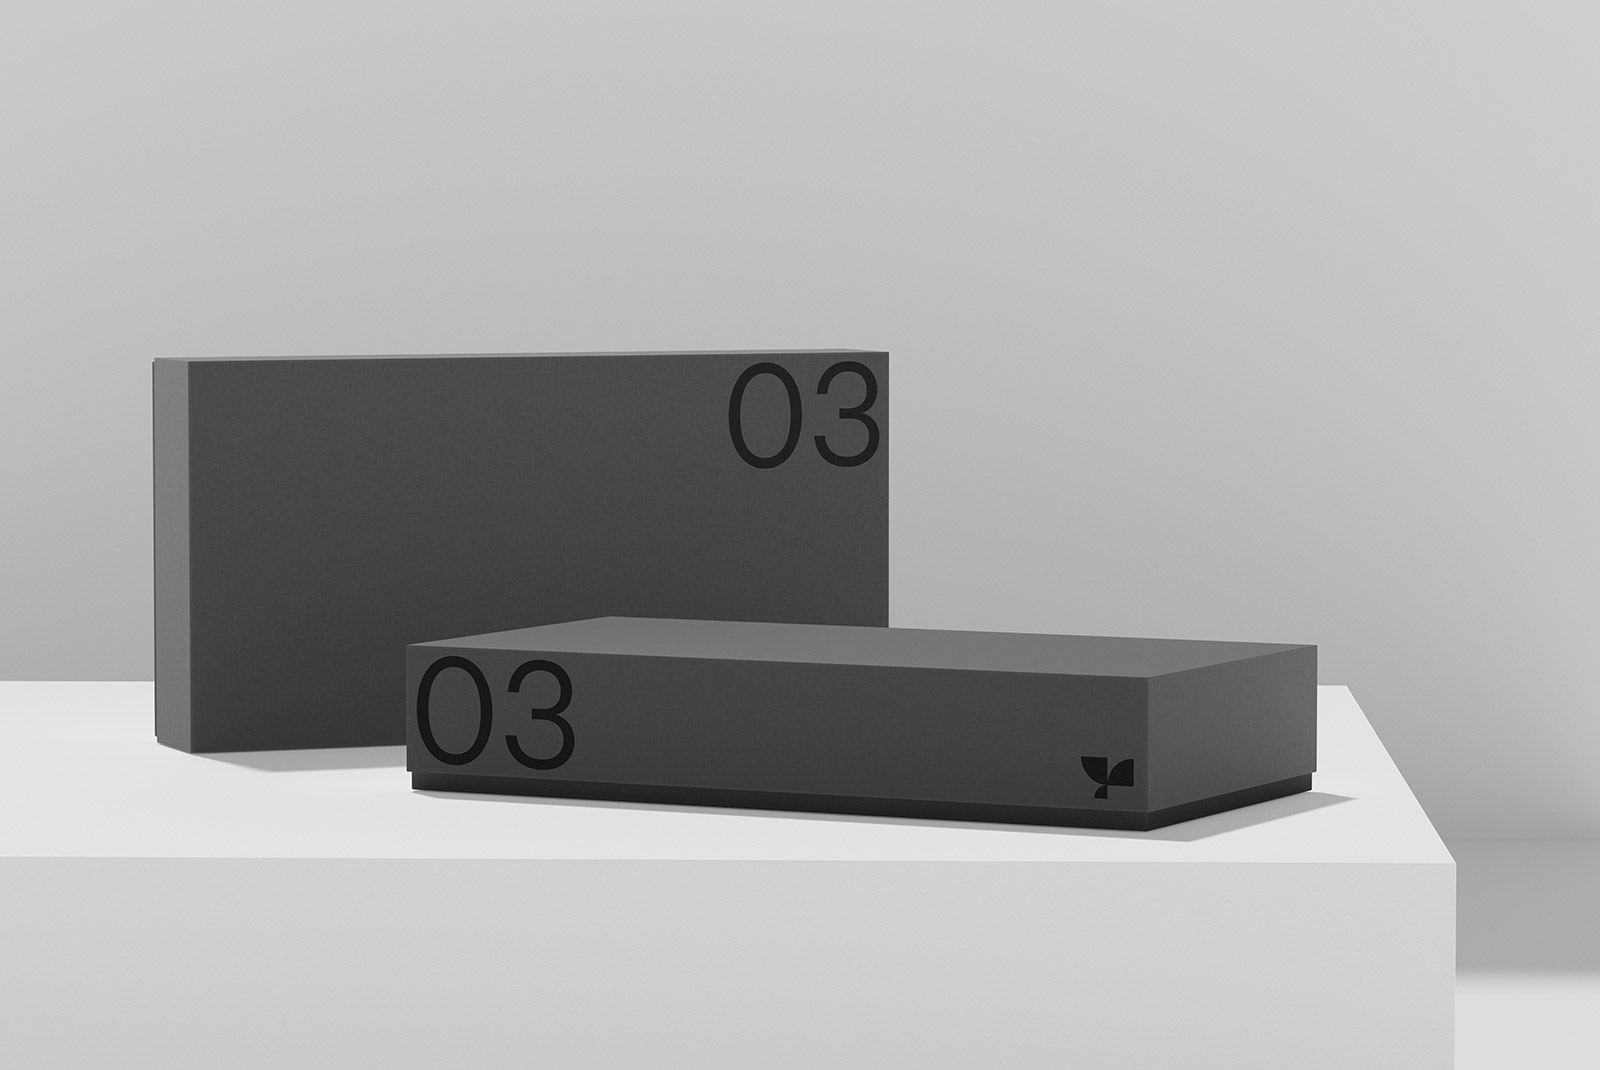 Minimalist black product boxes mockup with number 03 design on neutral background, ideal for packaging design presentation.